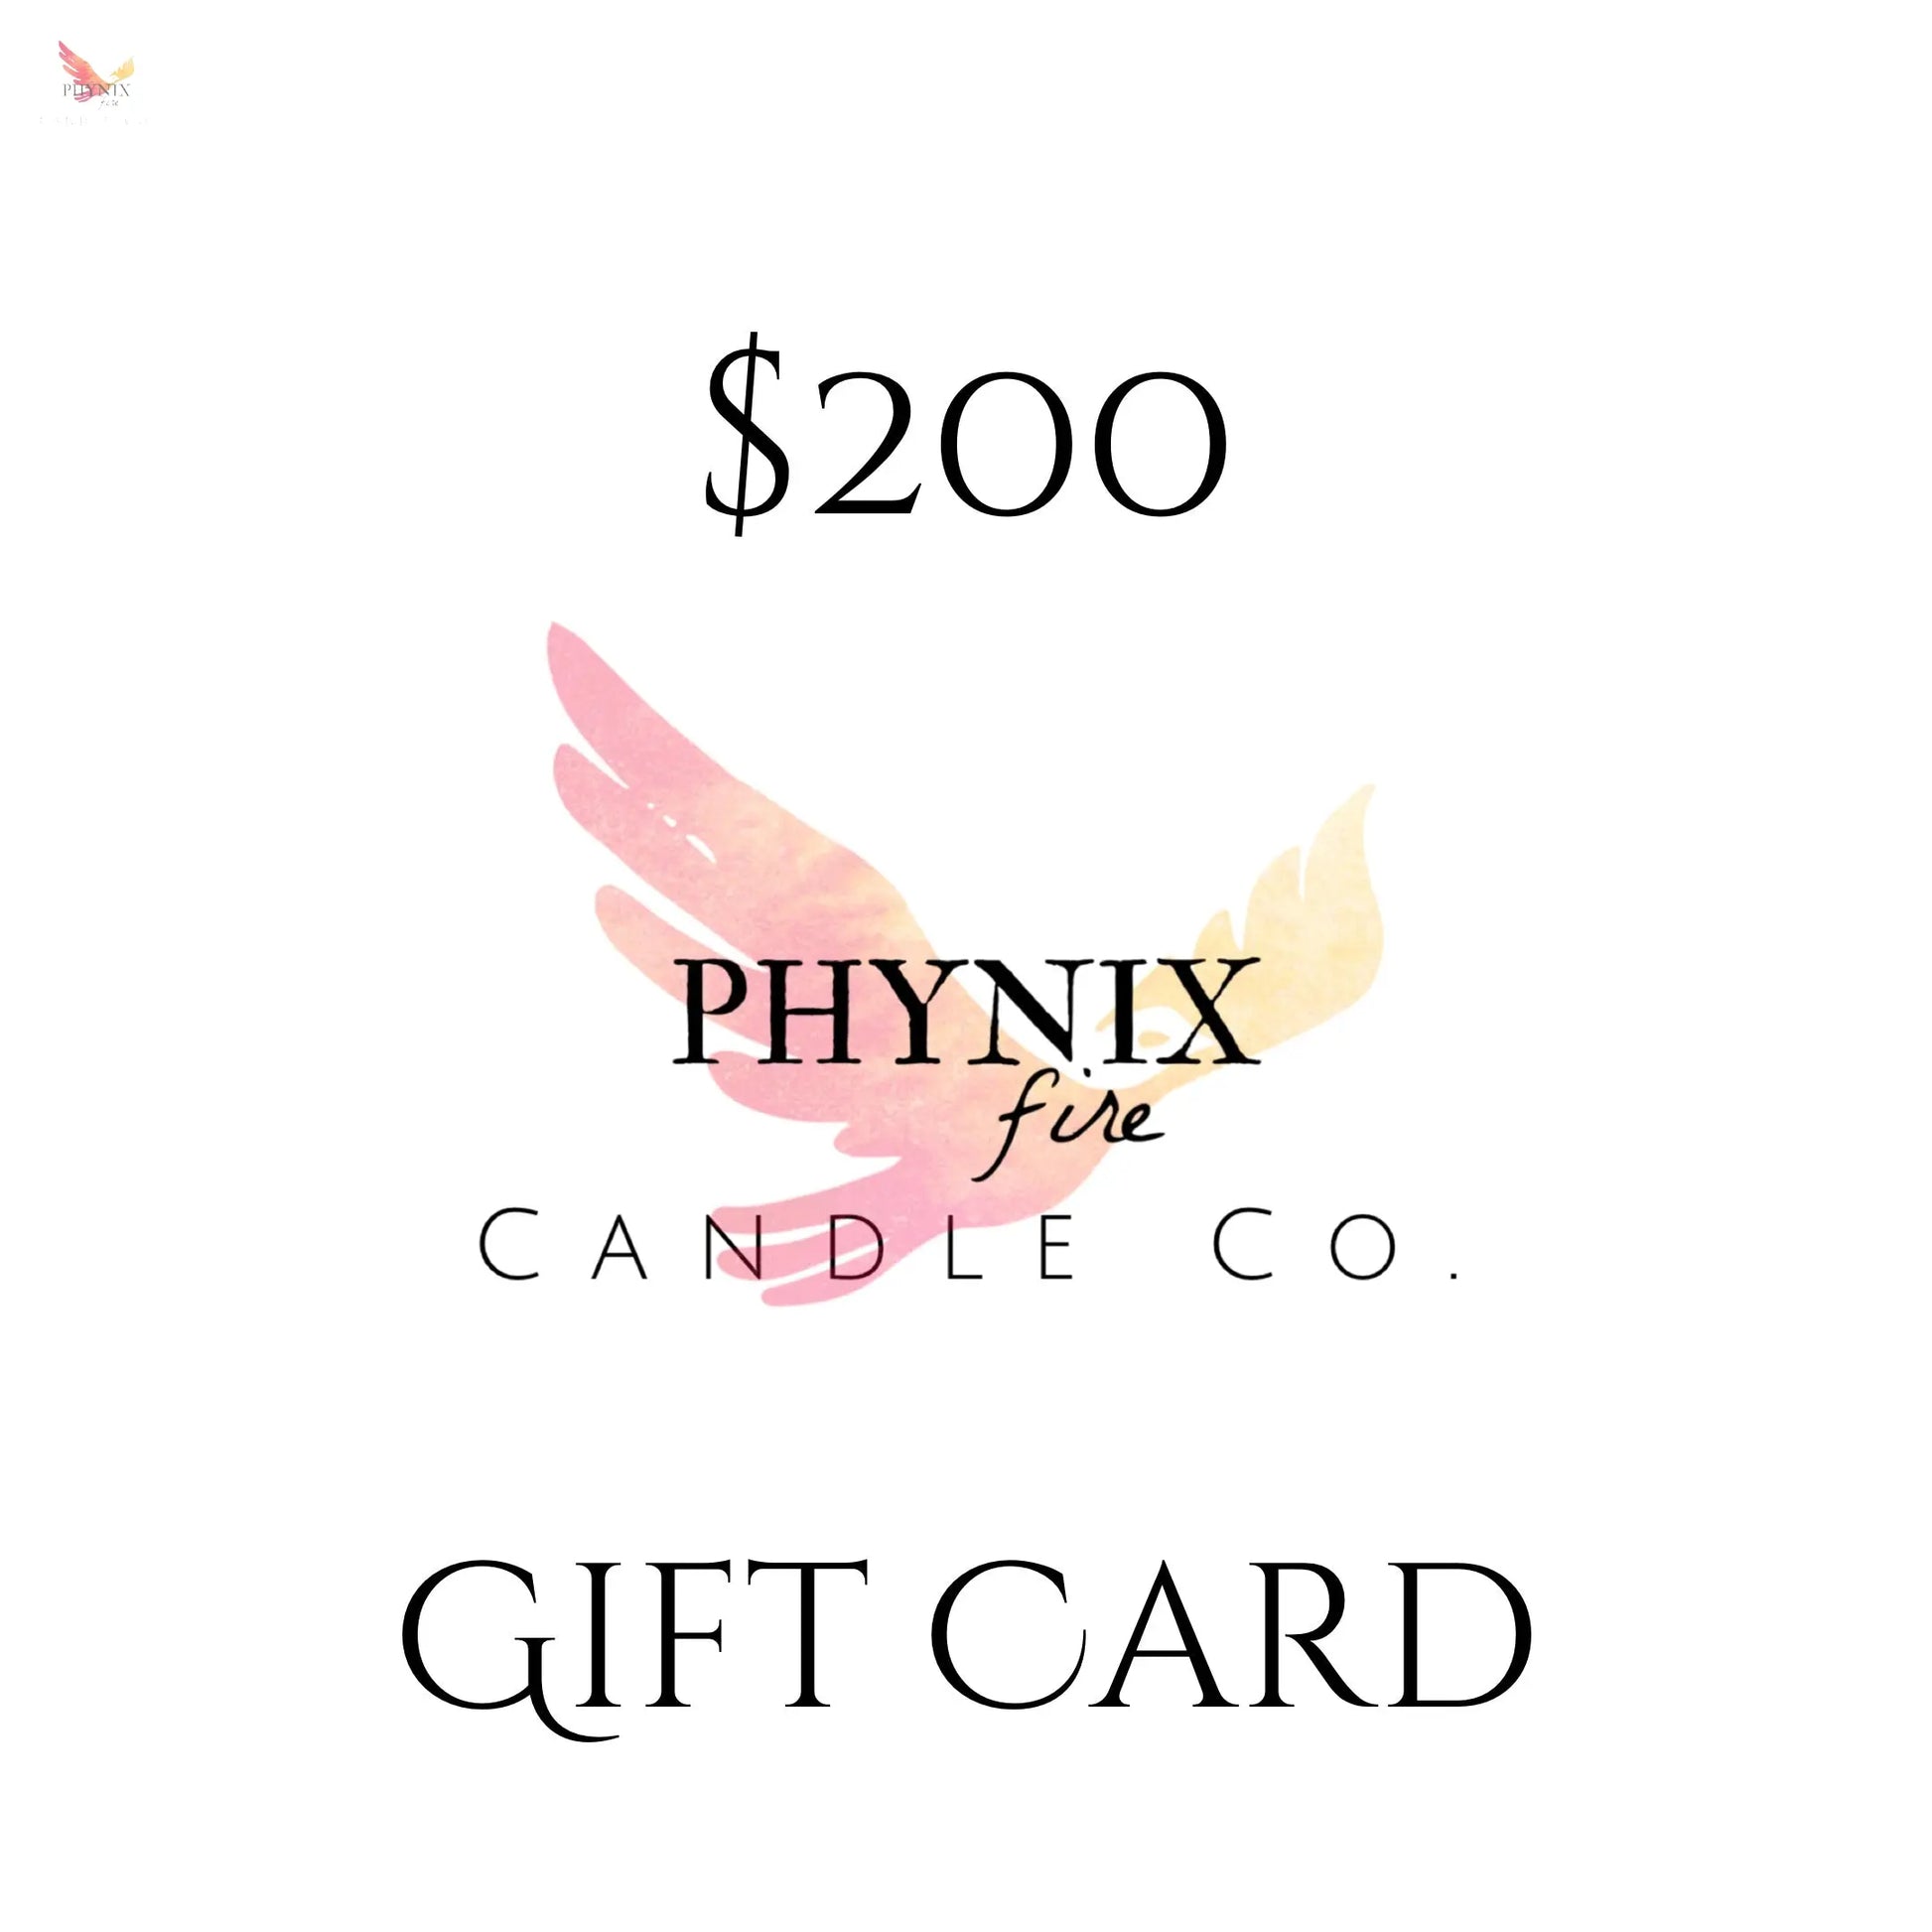 Phynix Fire Candle Co. Digital Gift Cards PHYNIX Fire